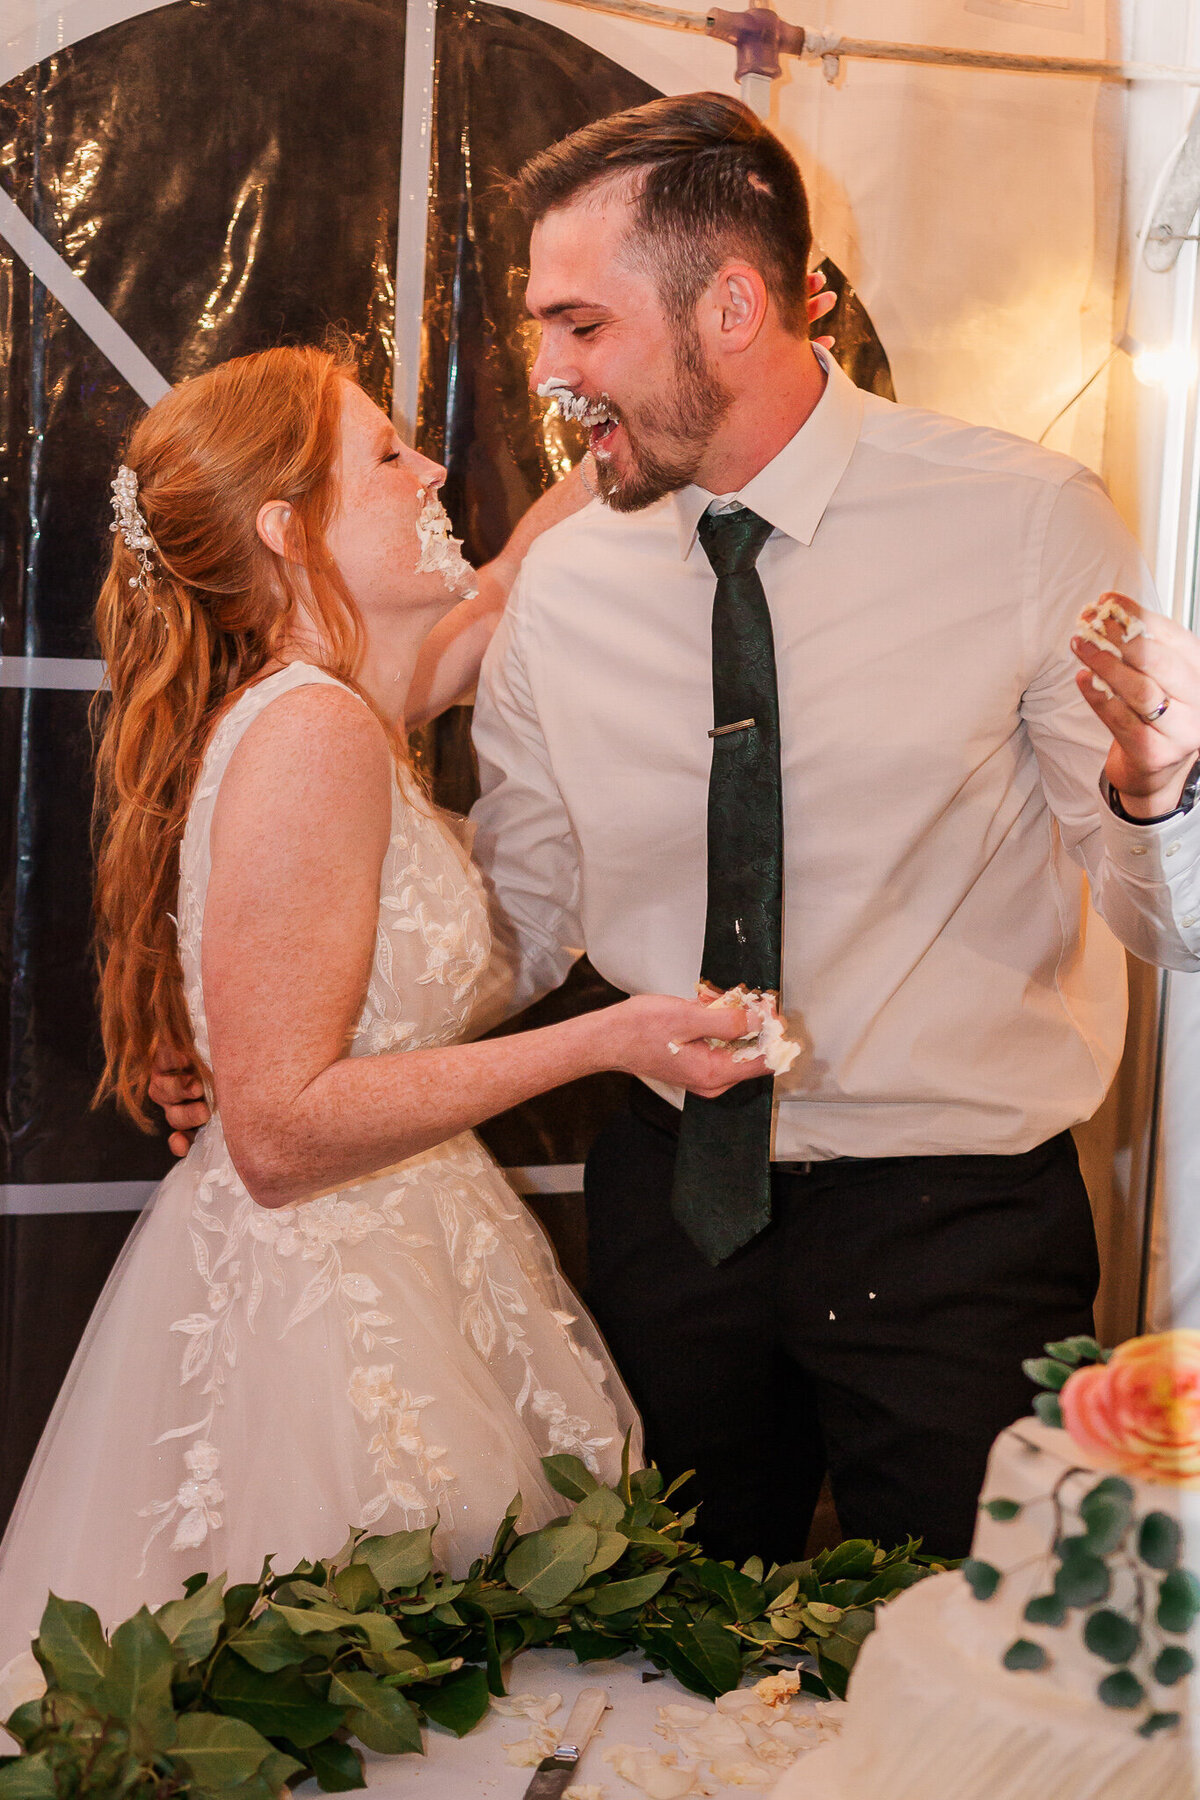 A bride and groom sharing their cake cutting and putting cake in each others faces enjoying their North Carolina wedding photography